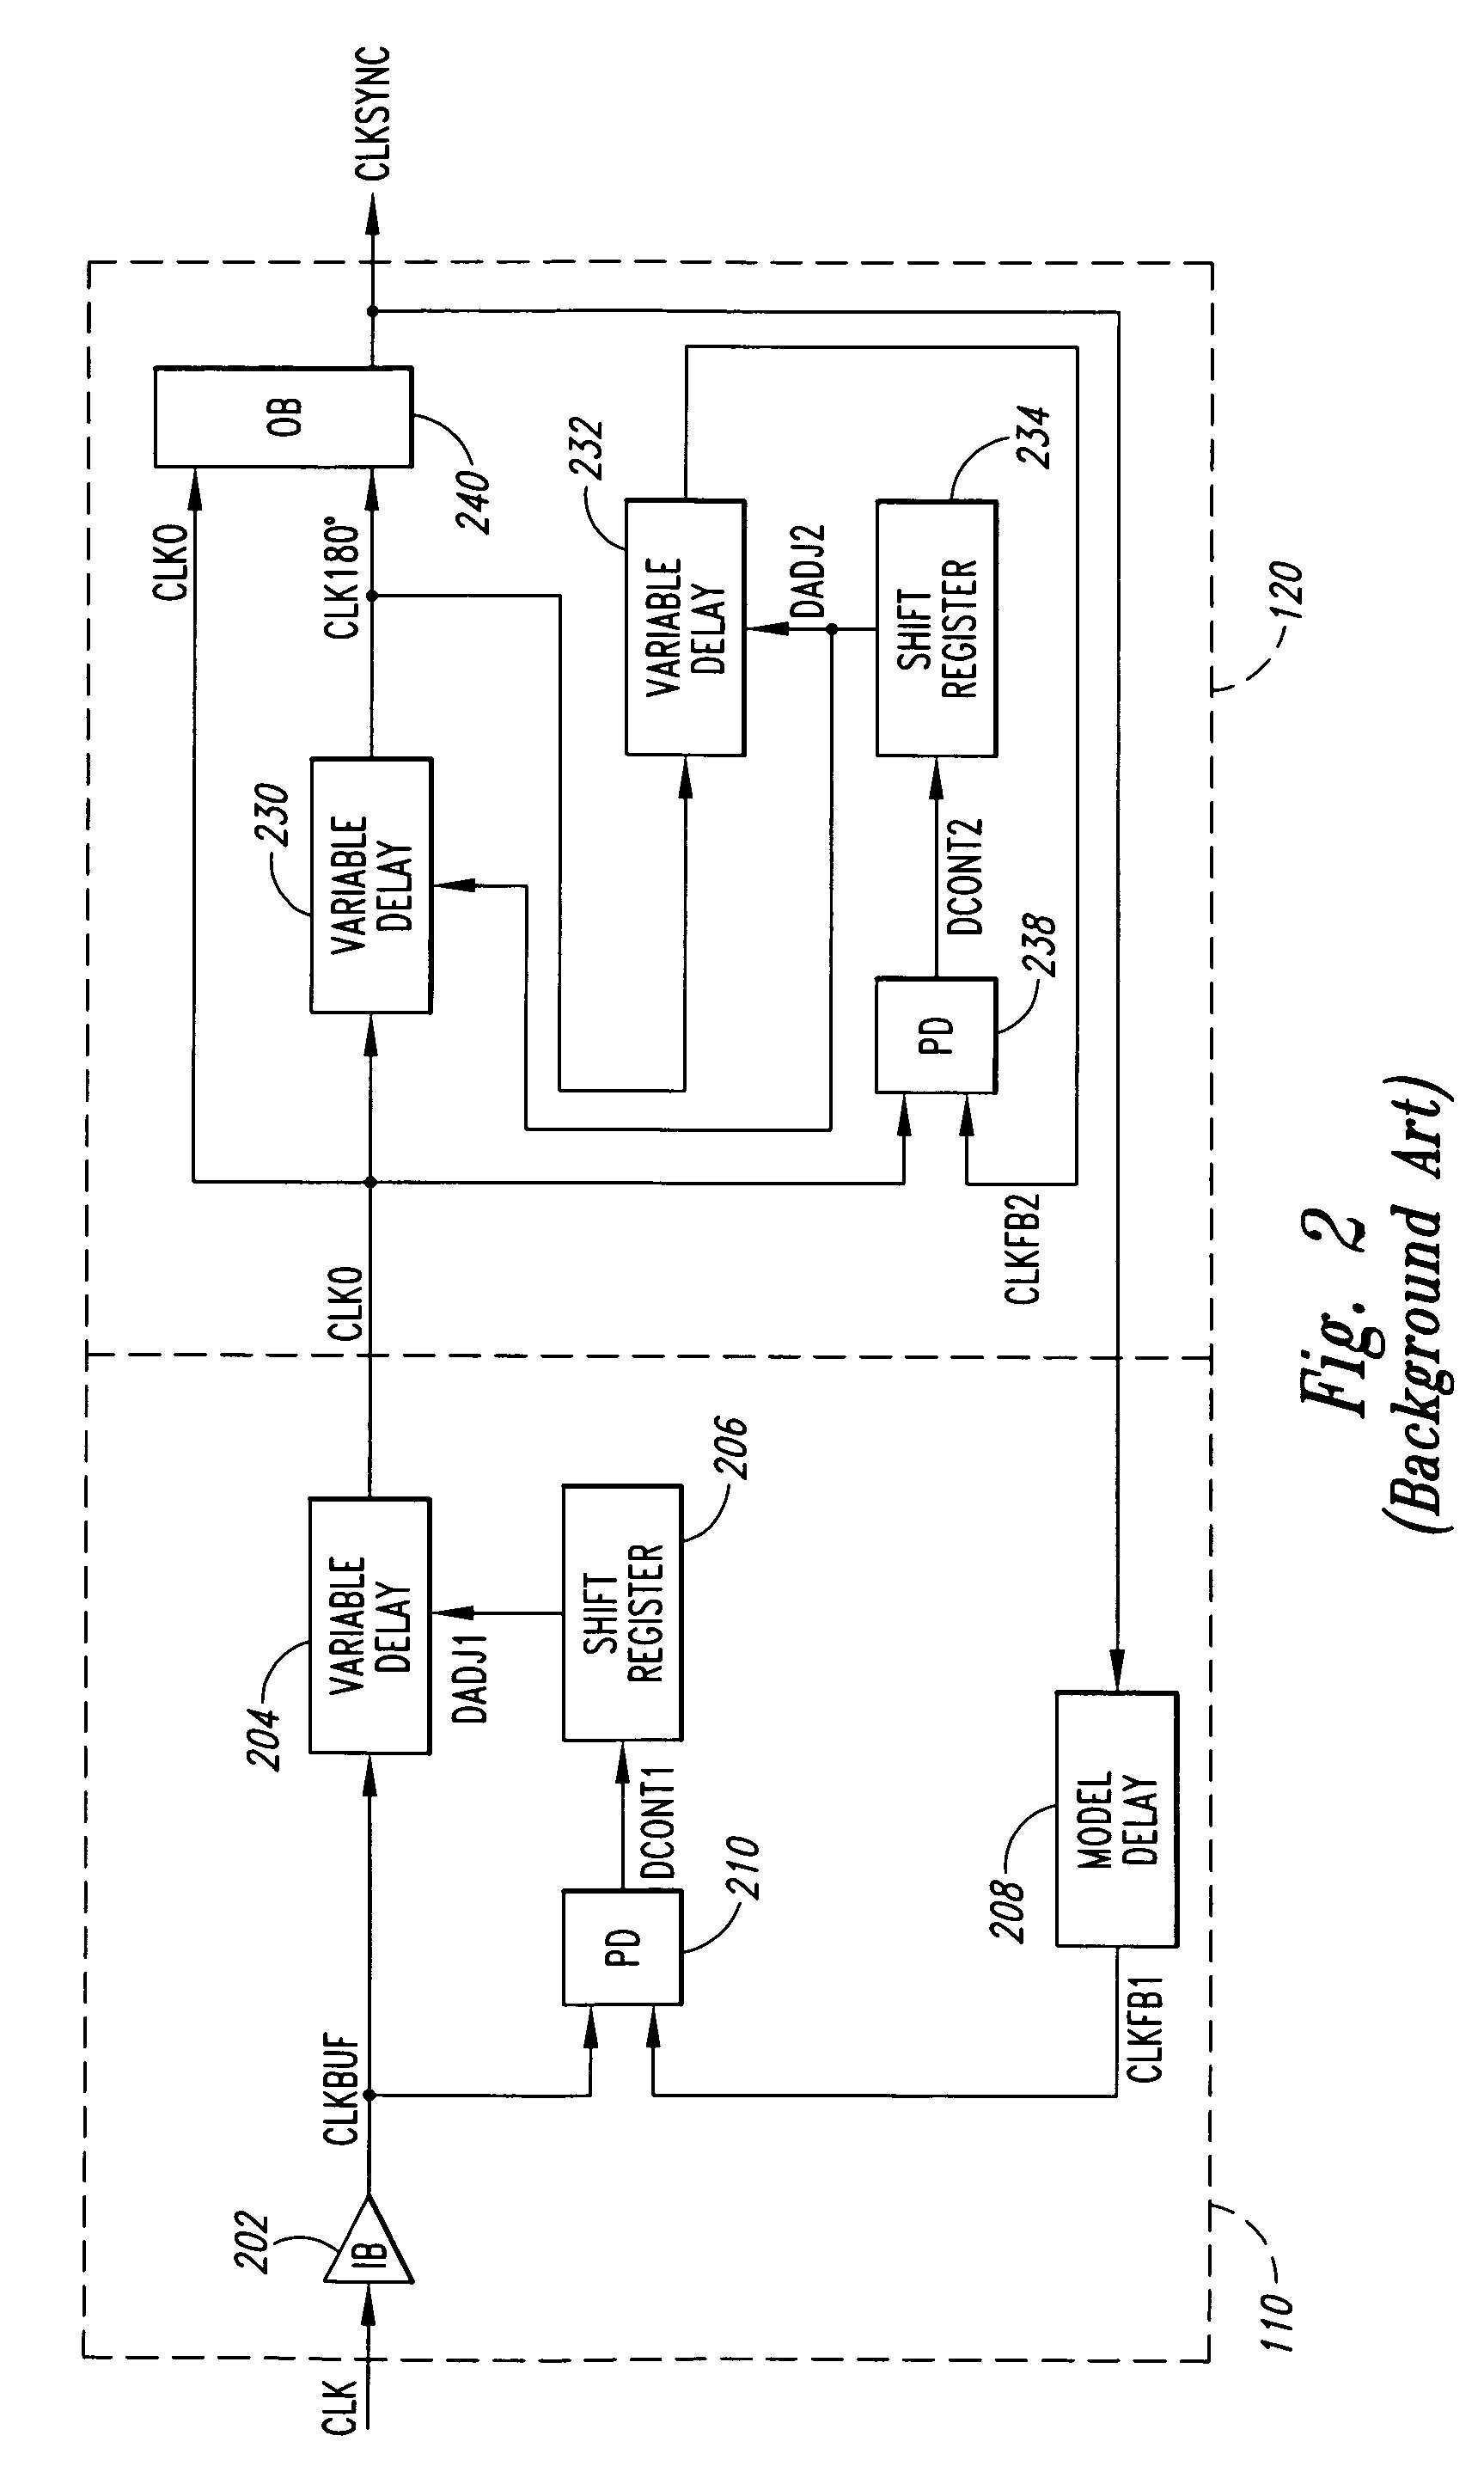 Clock generator having a delay locked loop and duty cycle correction circuit in a parallel configuration